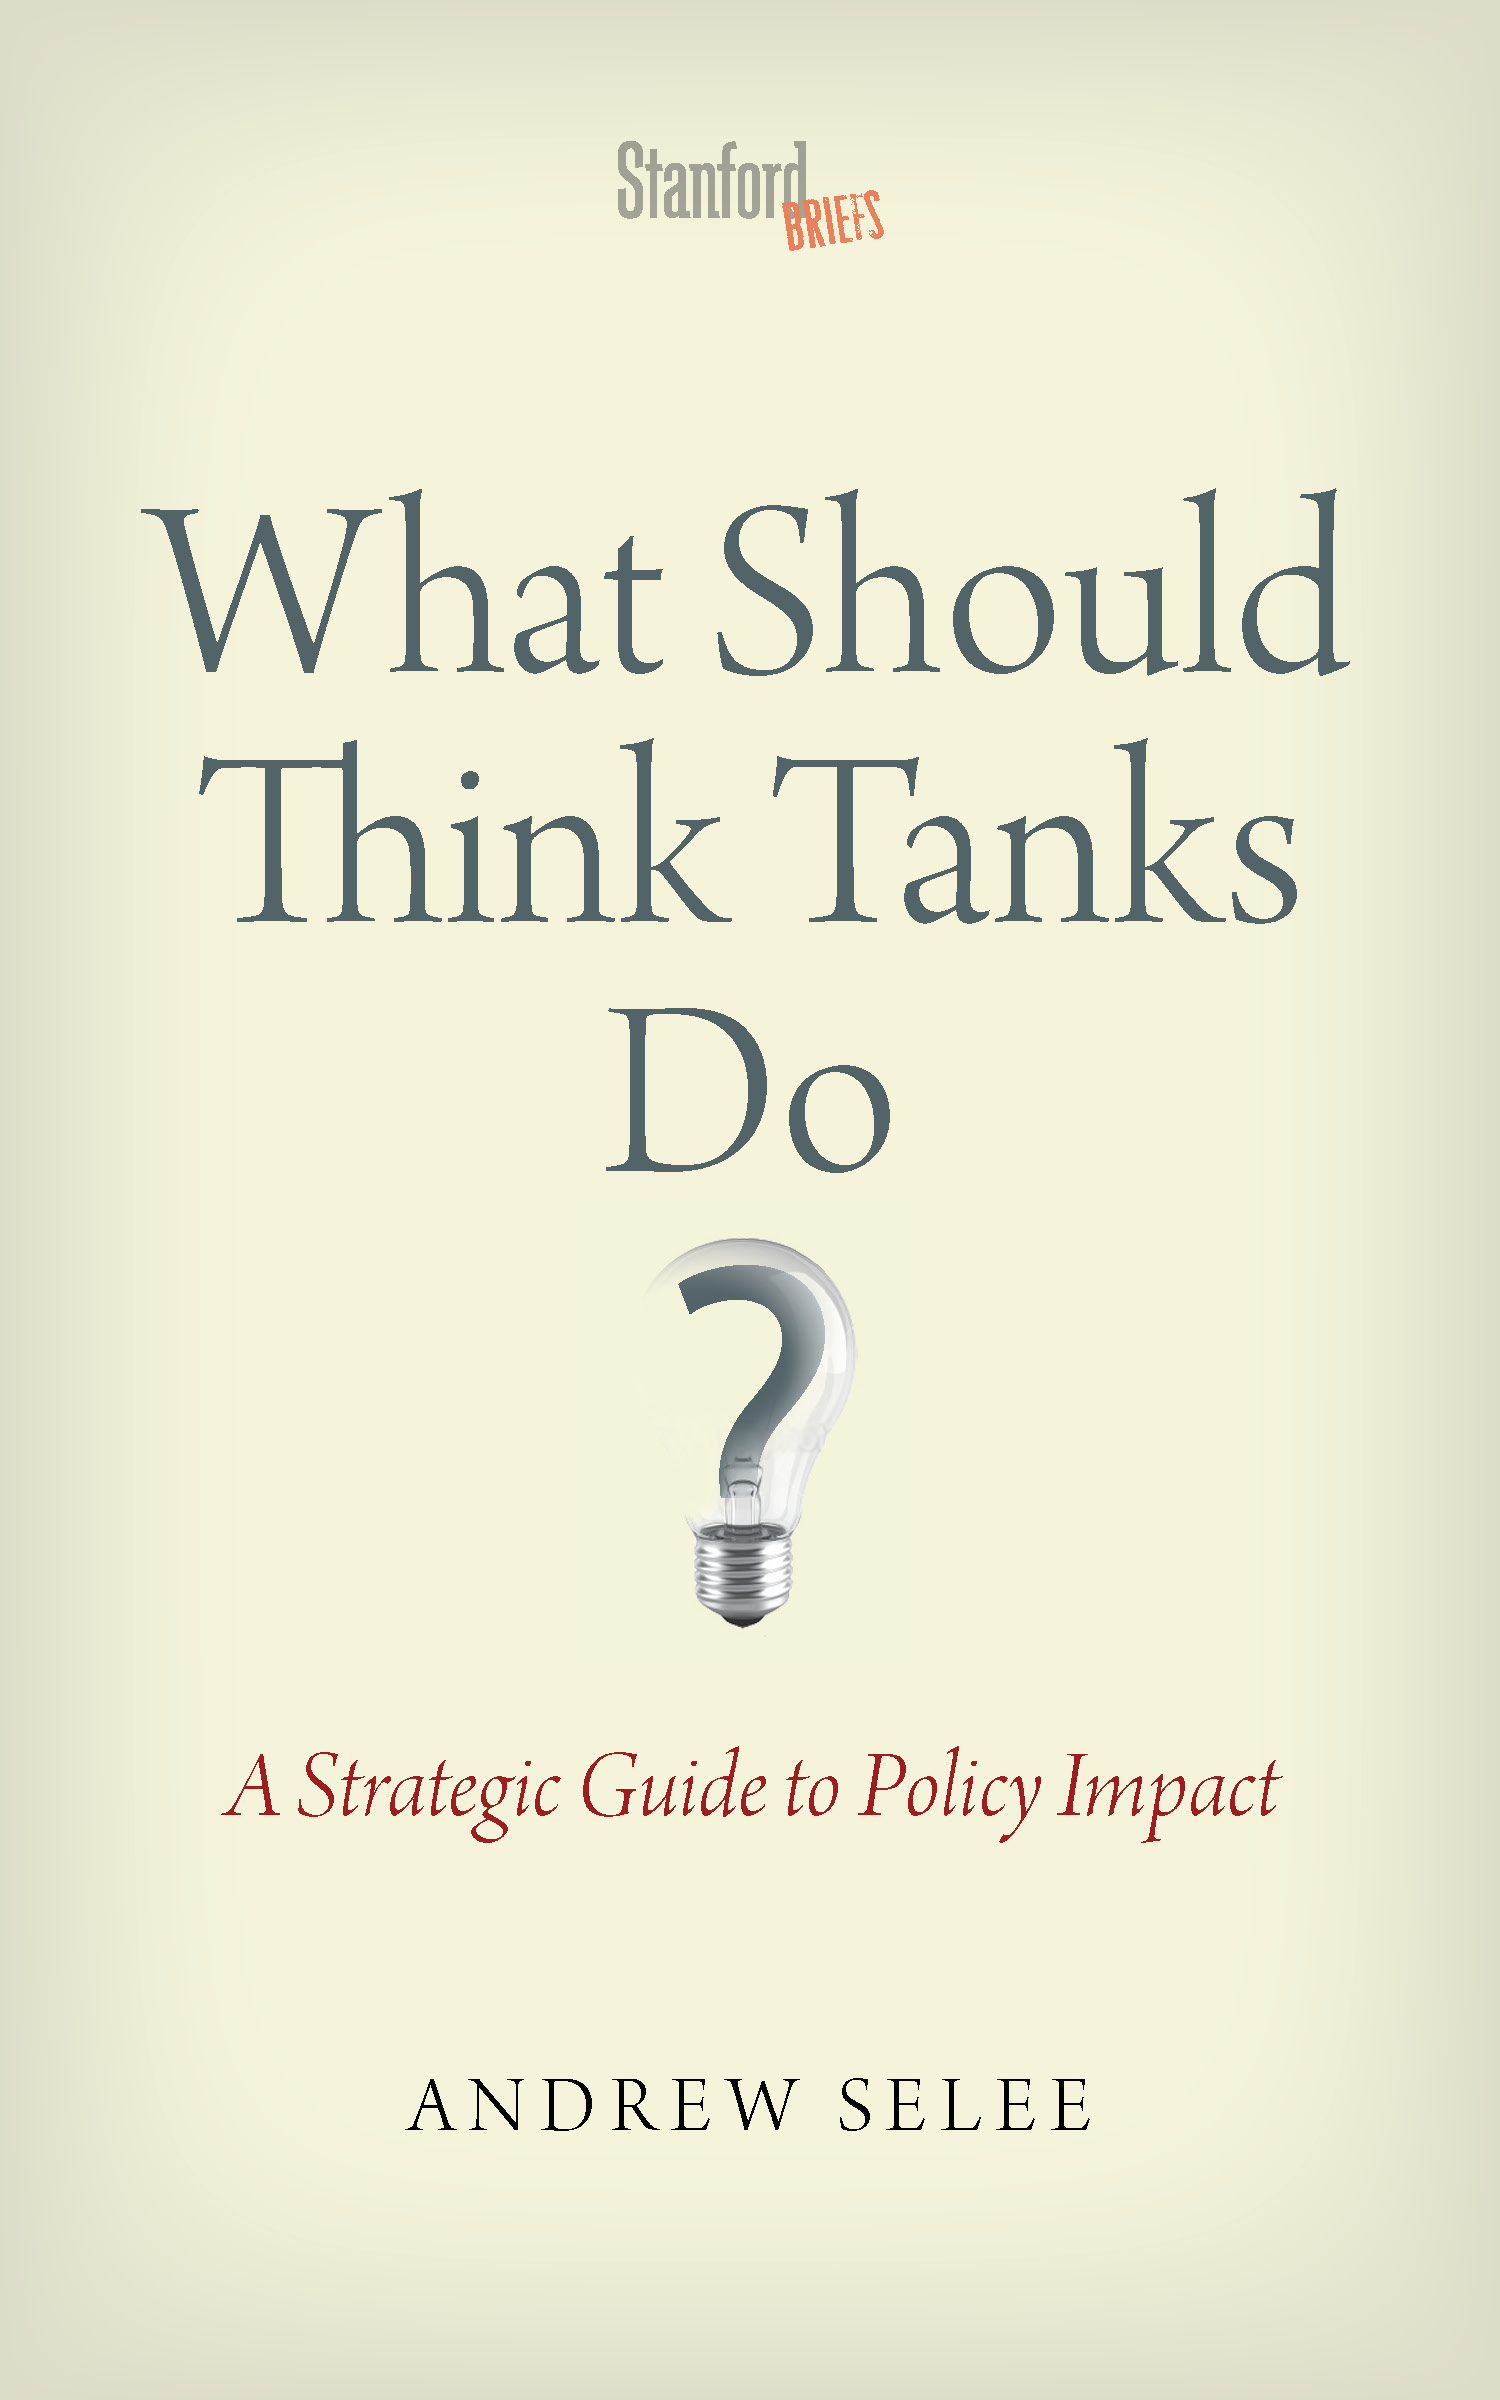 What Should Think Tanks Do?